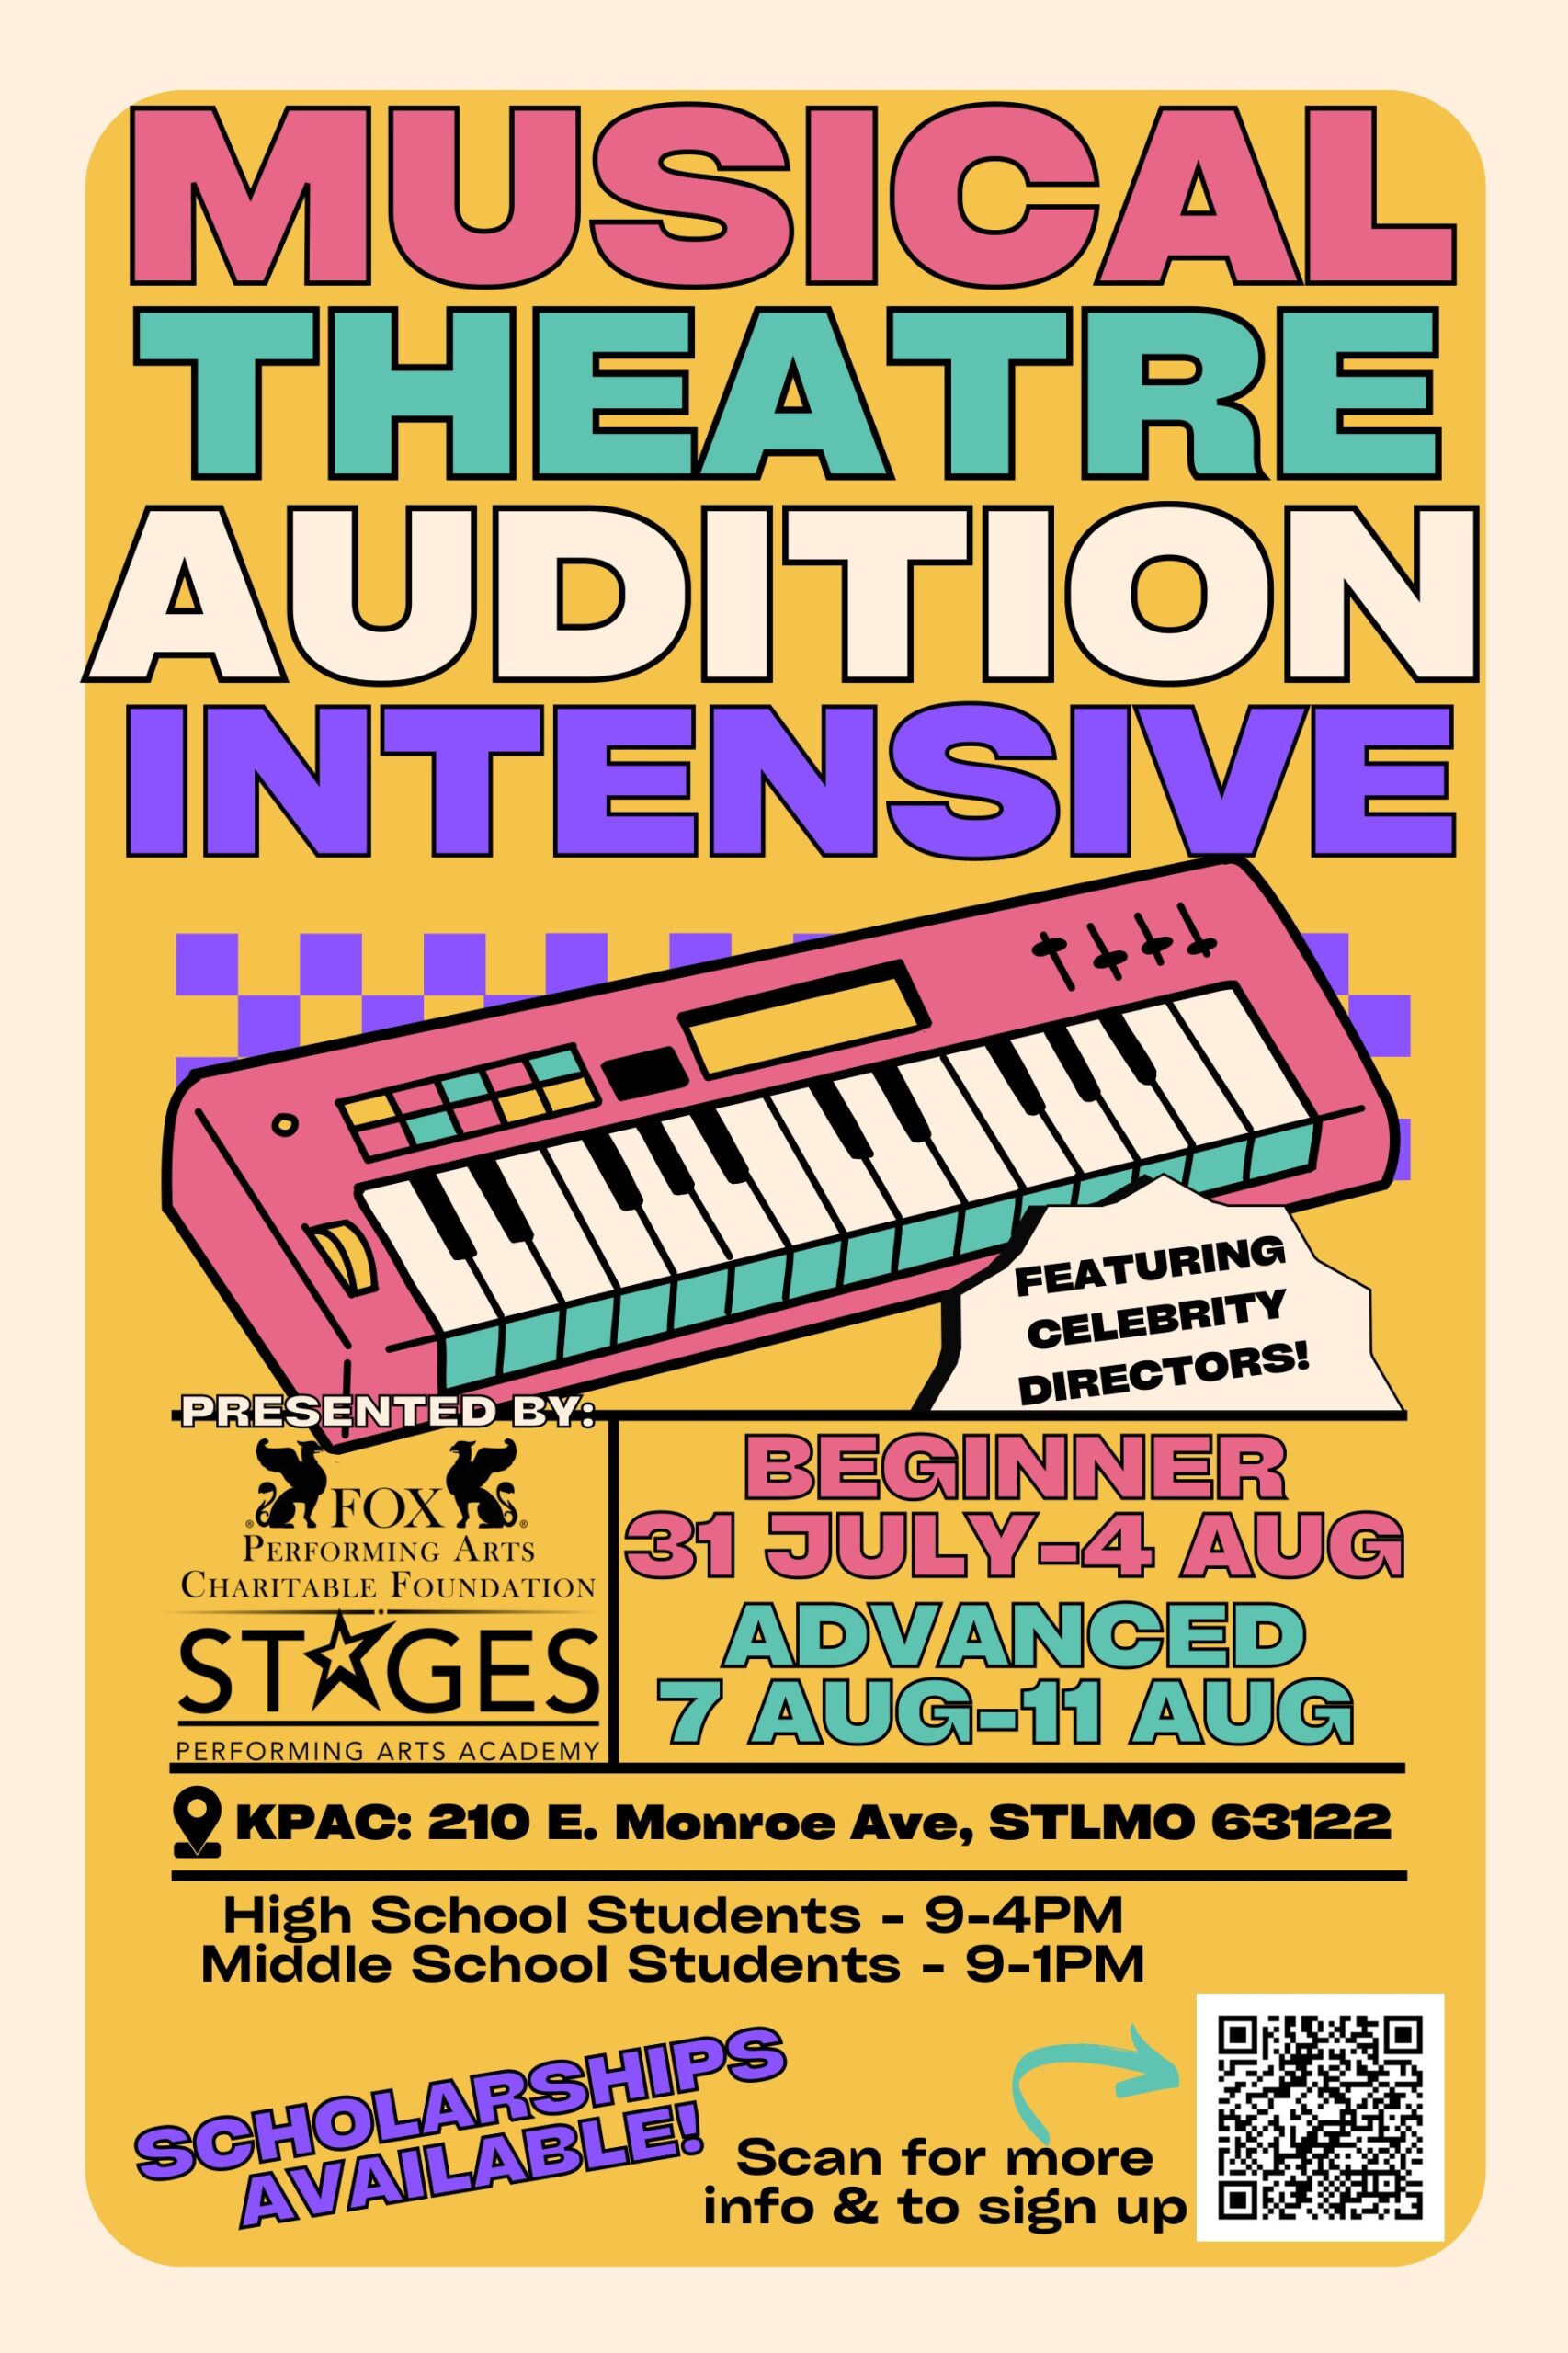 Audition Intensive